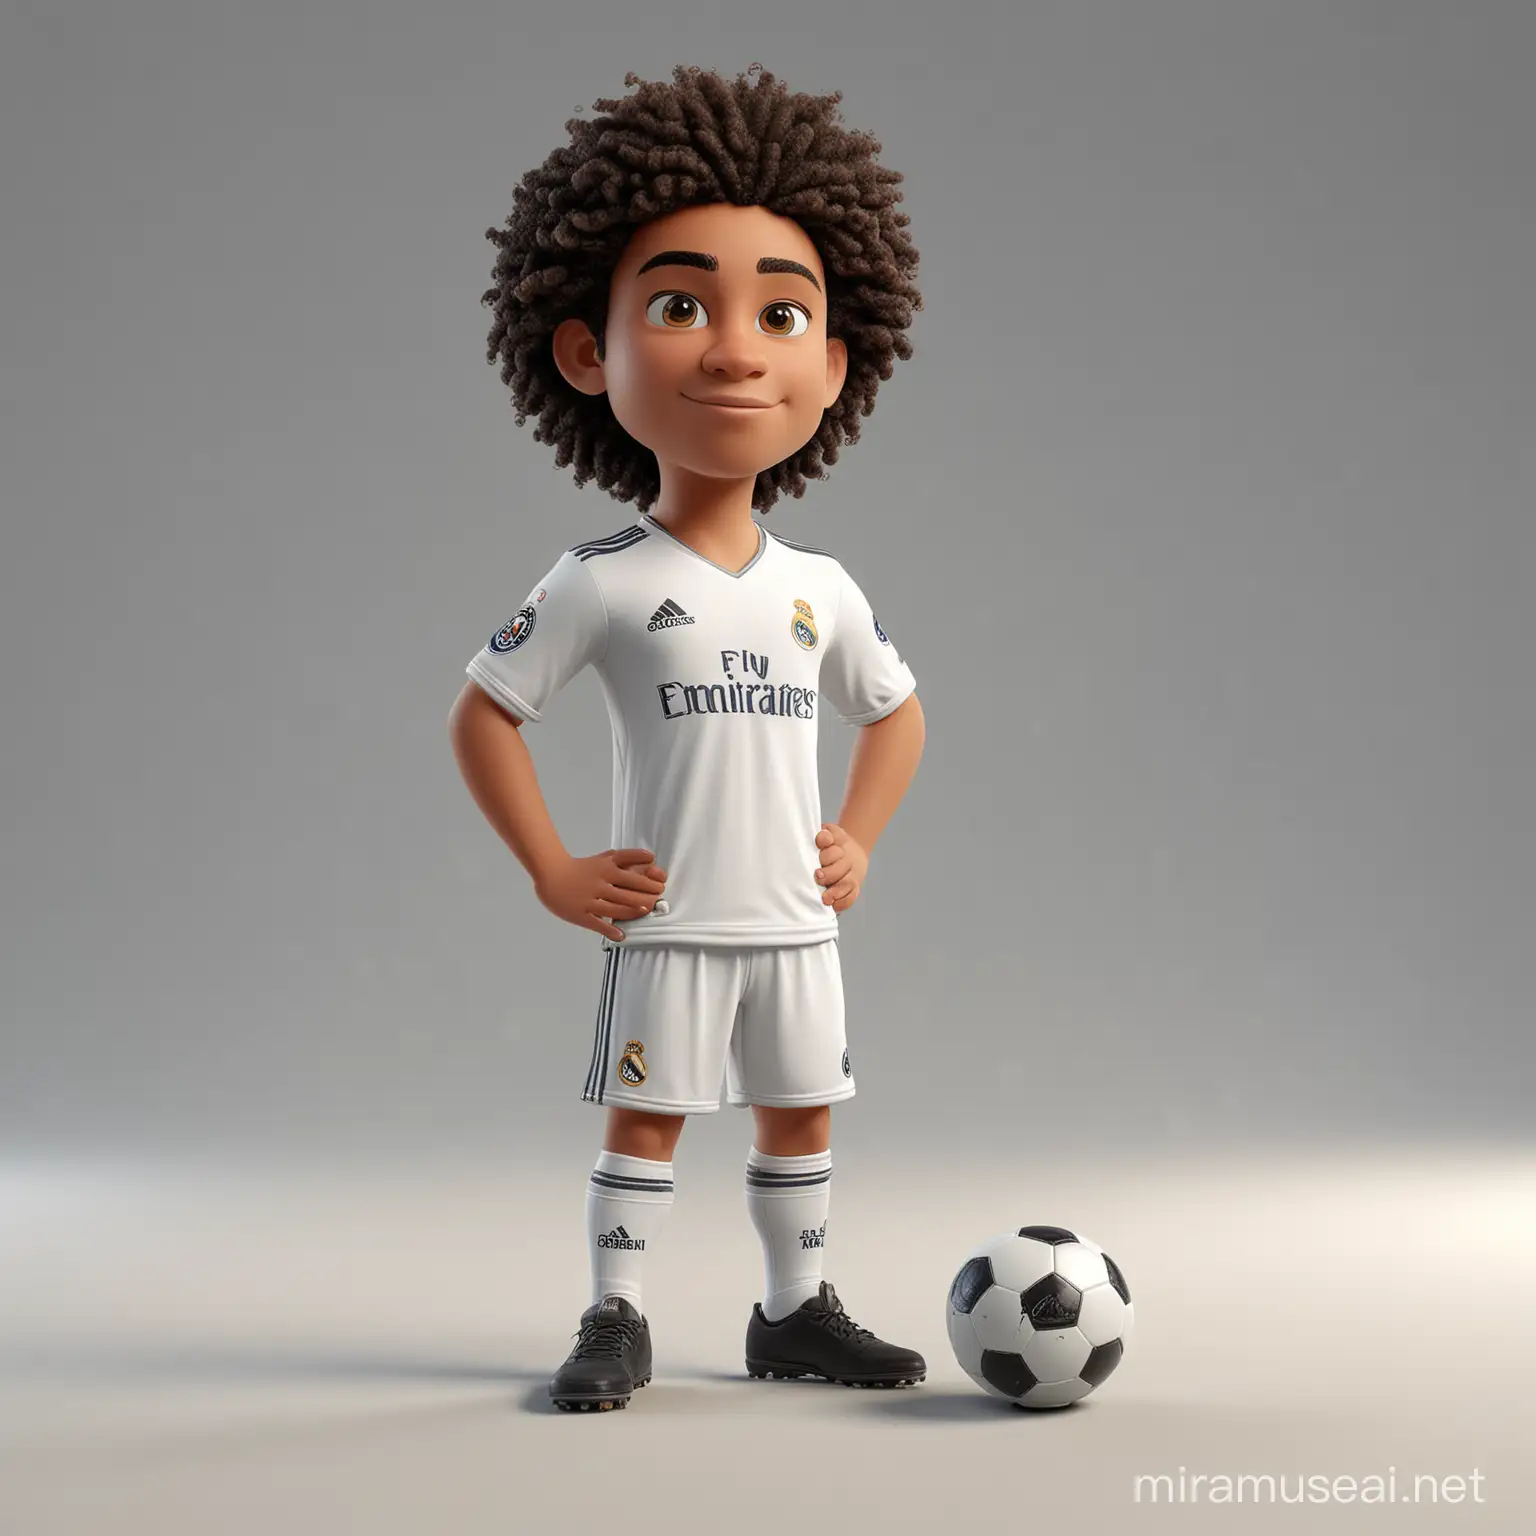 a 3d rendered cute soccer player who looks like marcelo, standing pose, real madrid kit, cartoon style